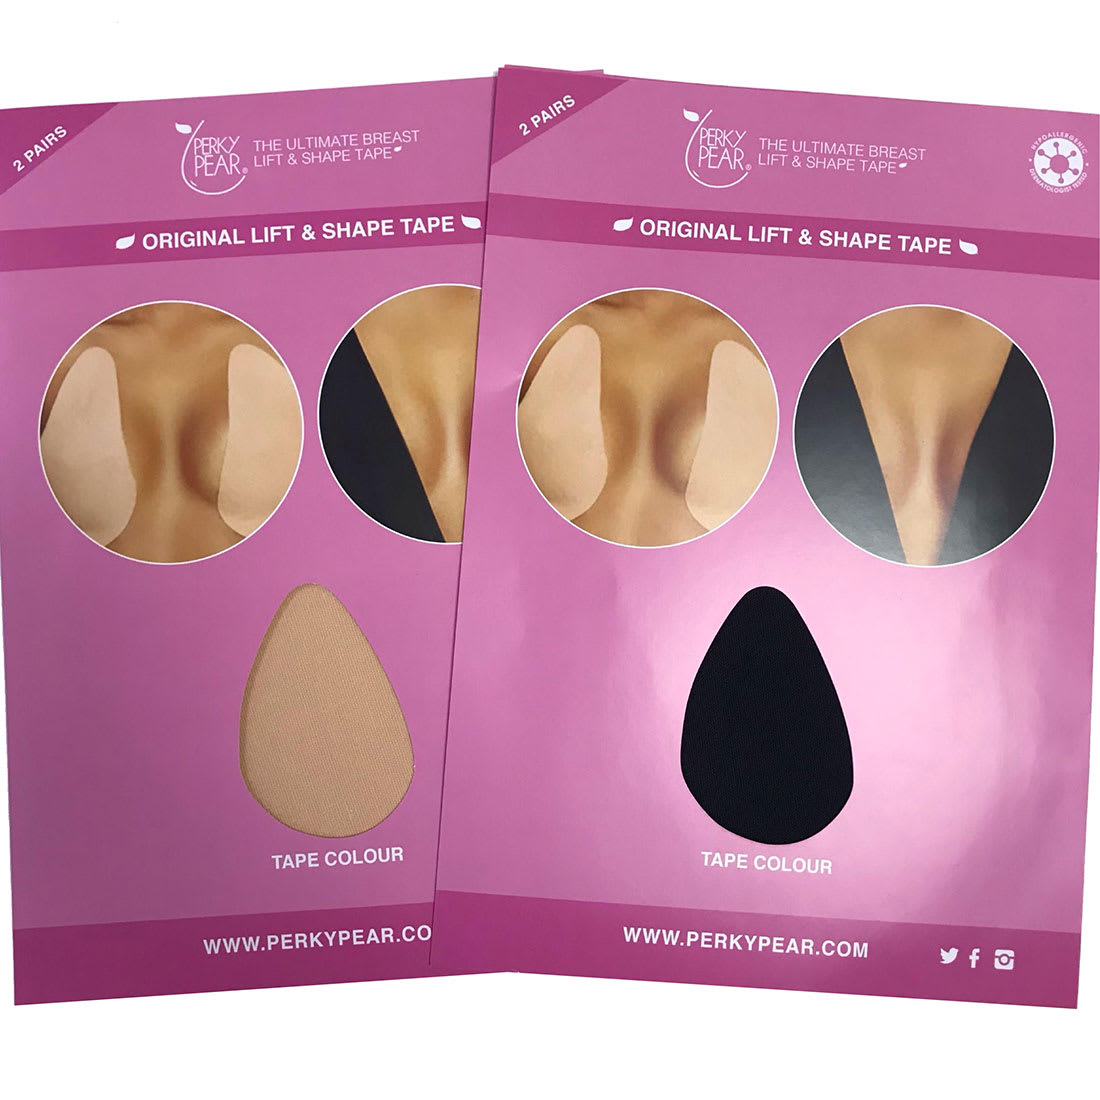 Perky Pear breast lift & shape tape- Why we're the best boob tape!